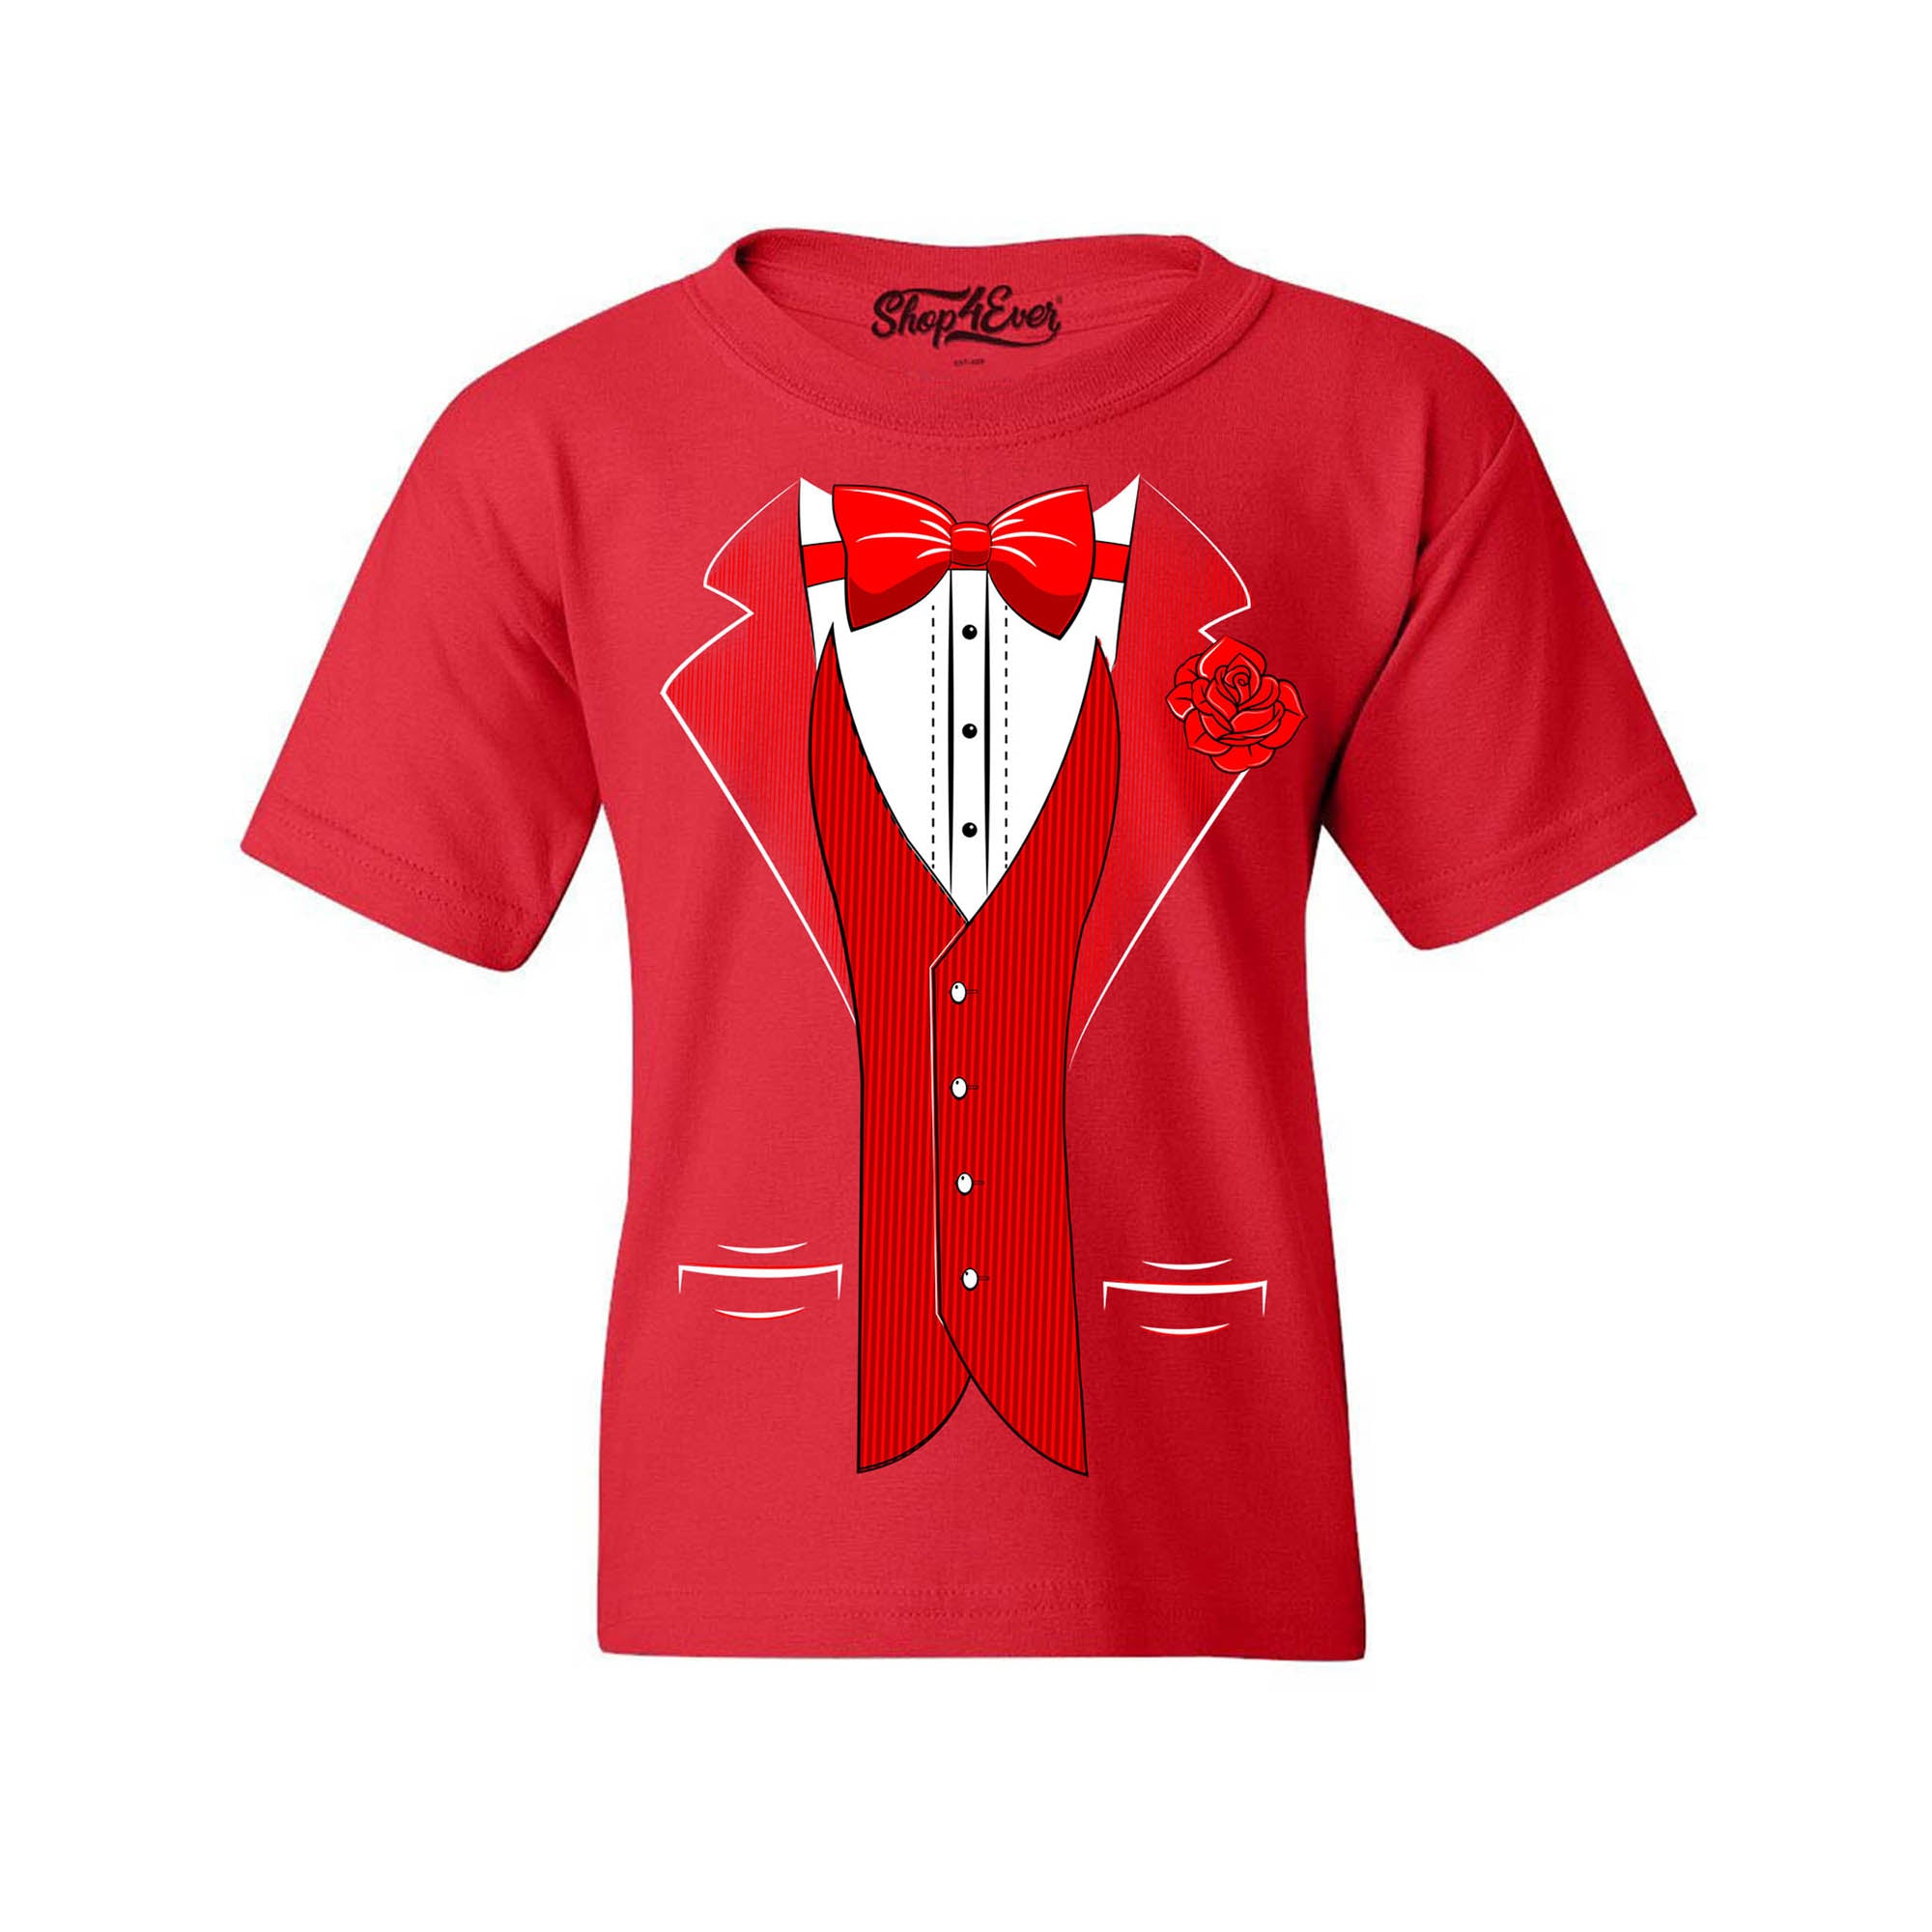 Classic Tuxedo with Red Rose Youth's T-Shirt Party Costume Shirts